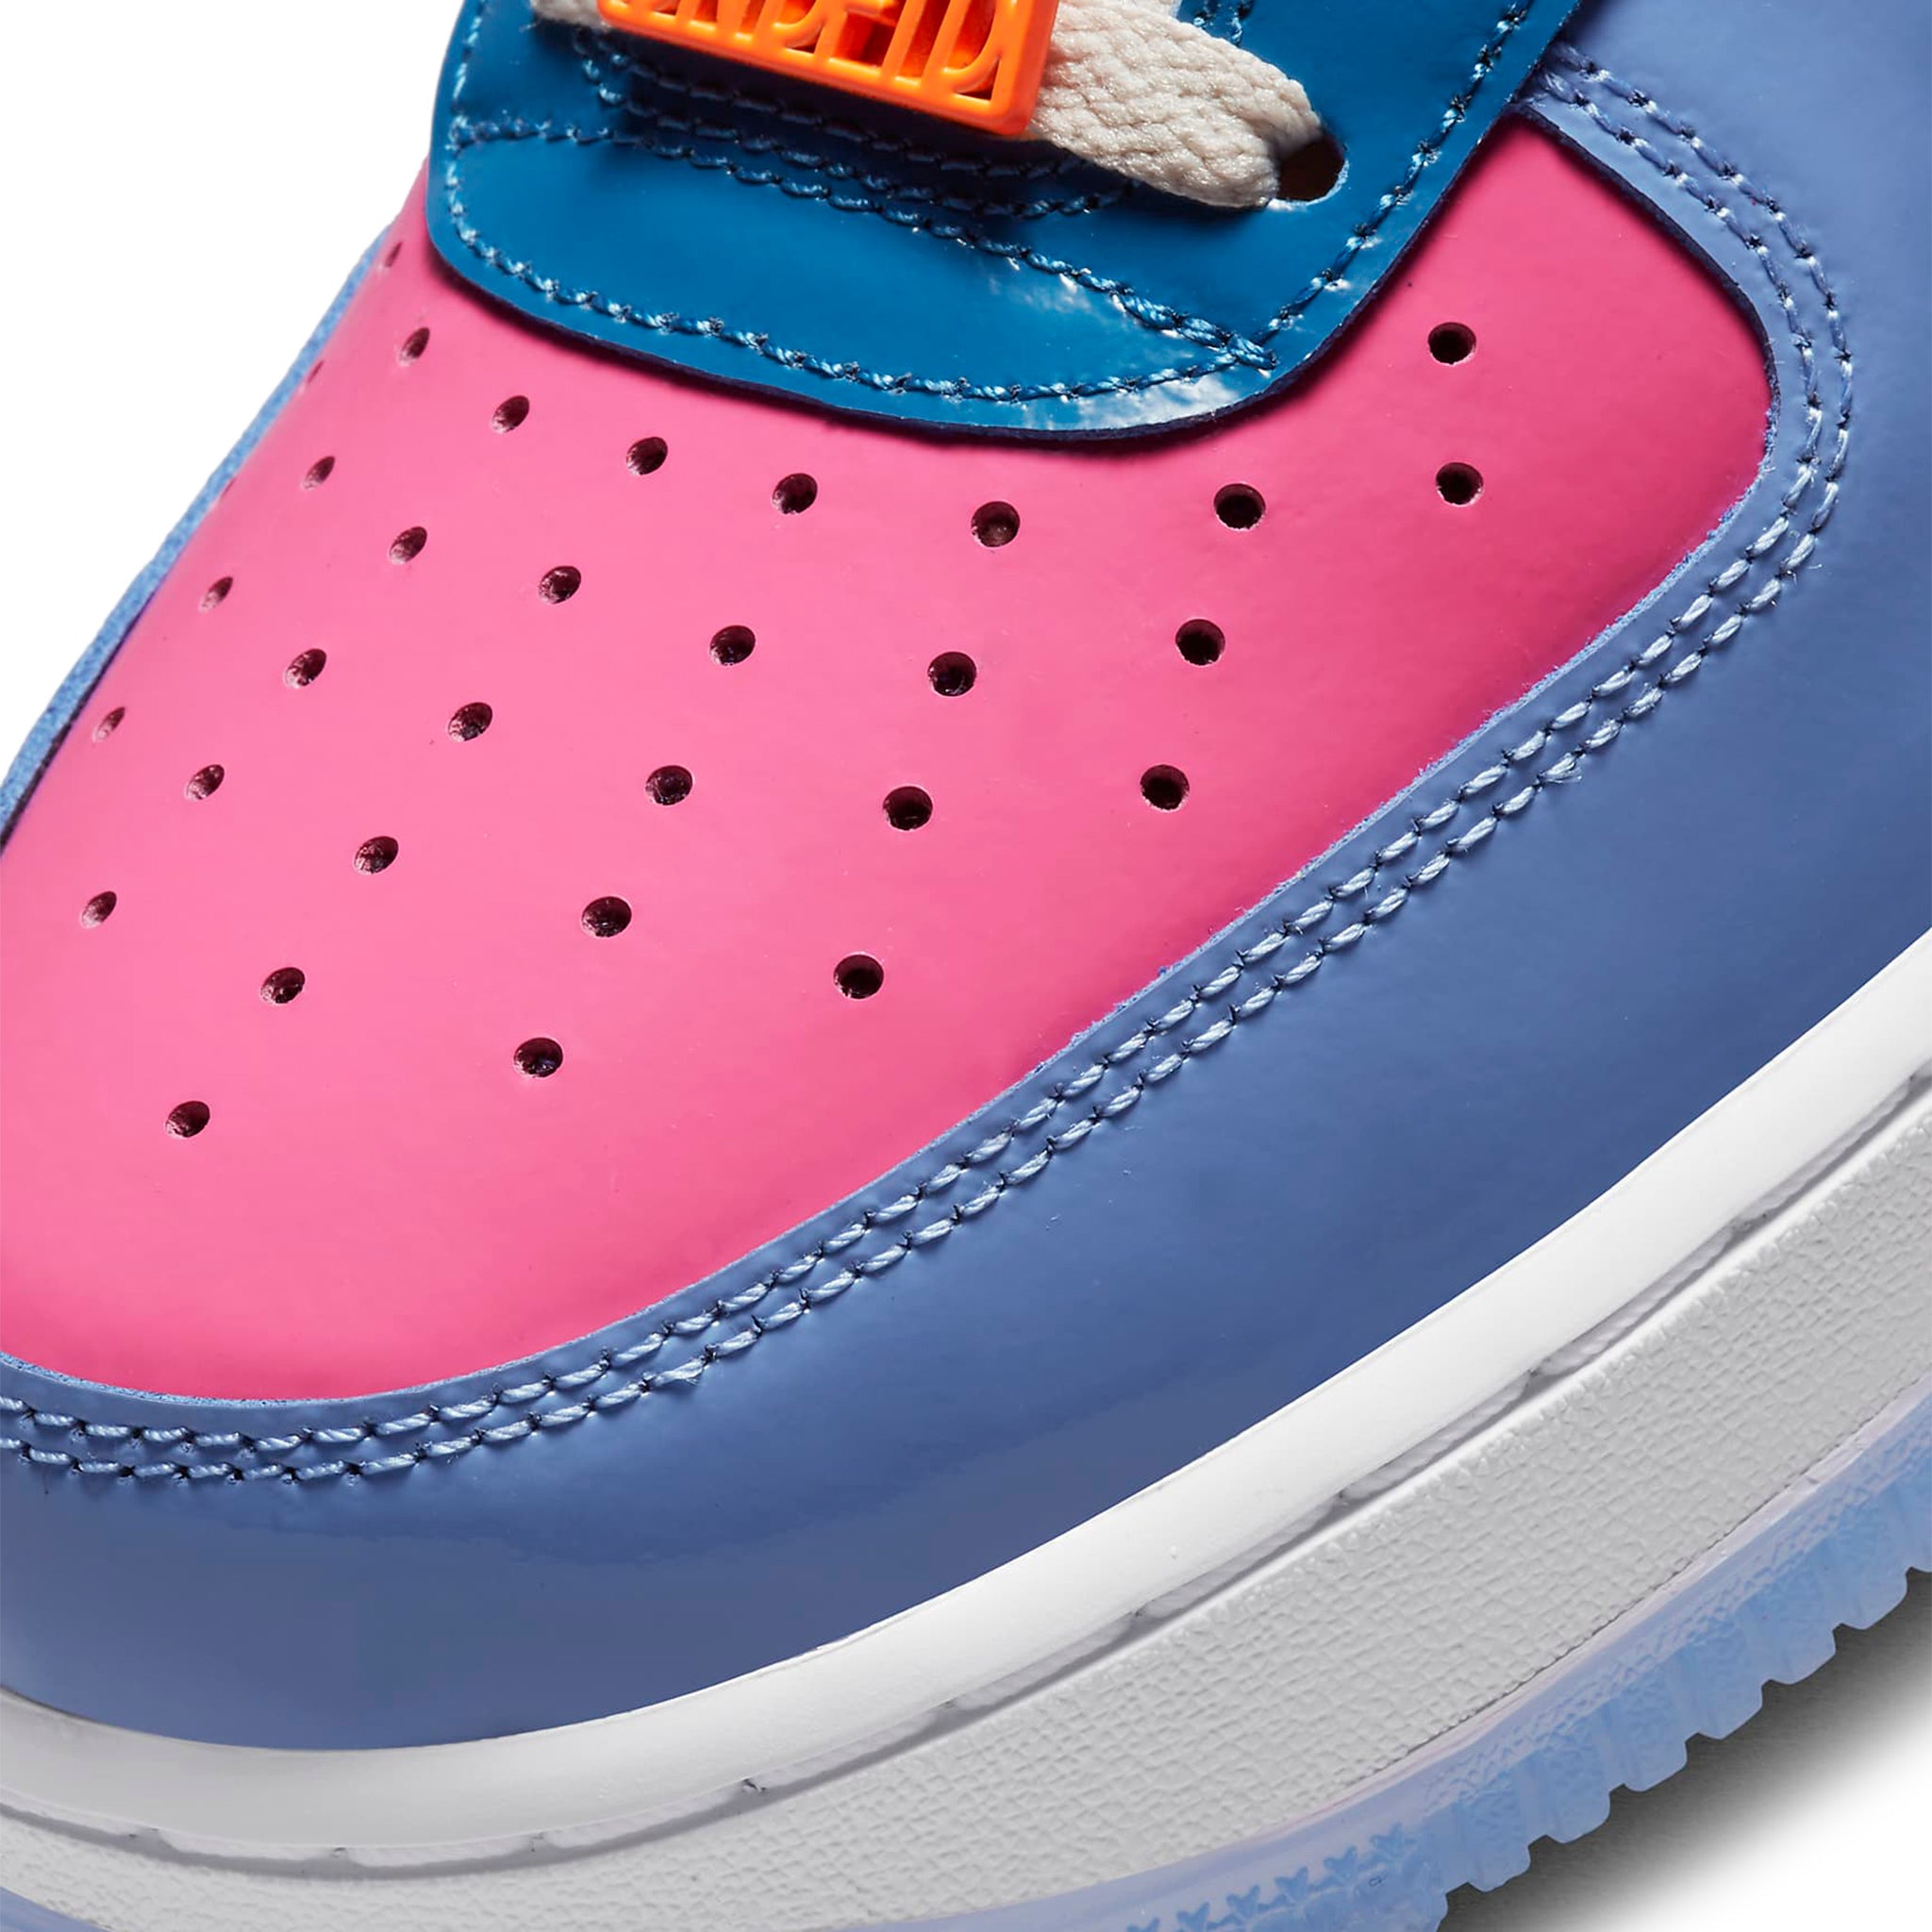 Toe box view of Undefeated x Nike Air Force 1 Low Multi-Patent DV5255-400